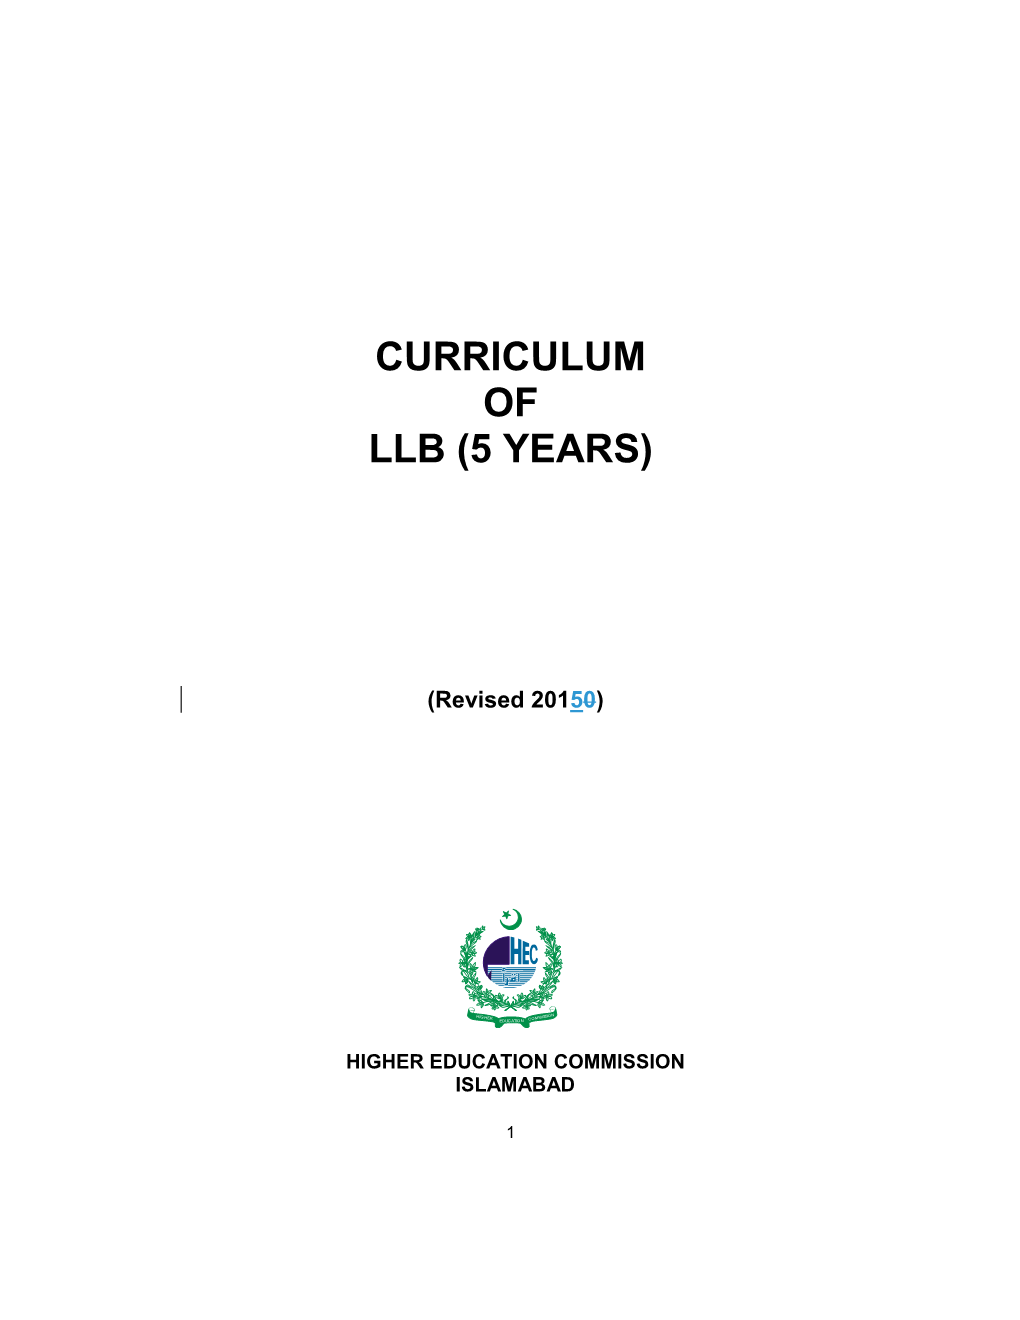 Curriculum of Llb (5 Years)